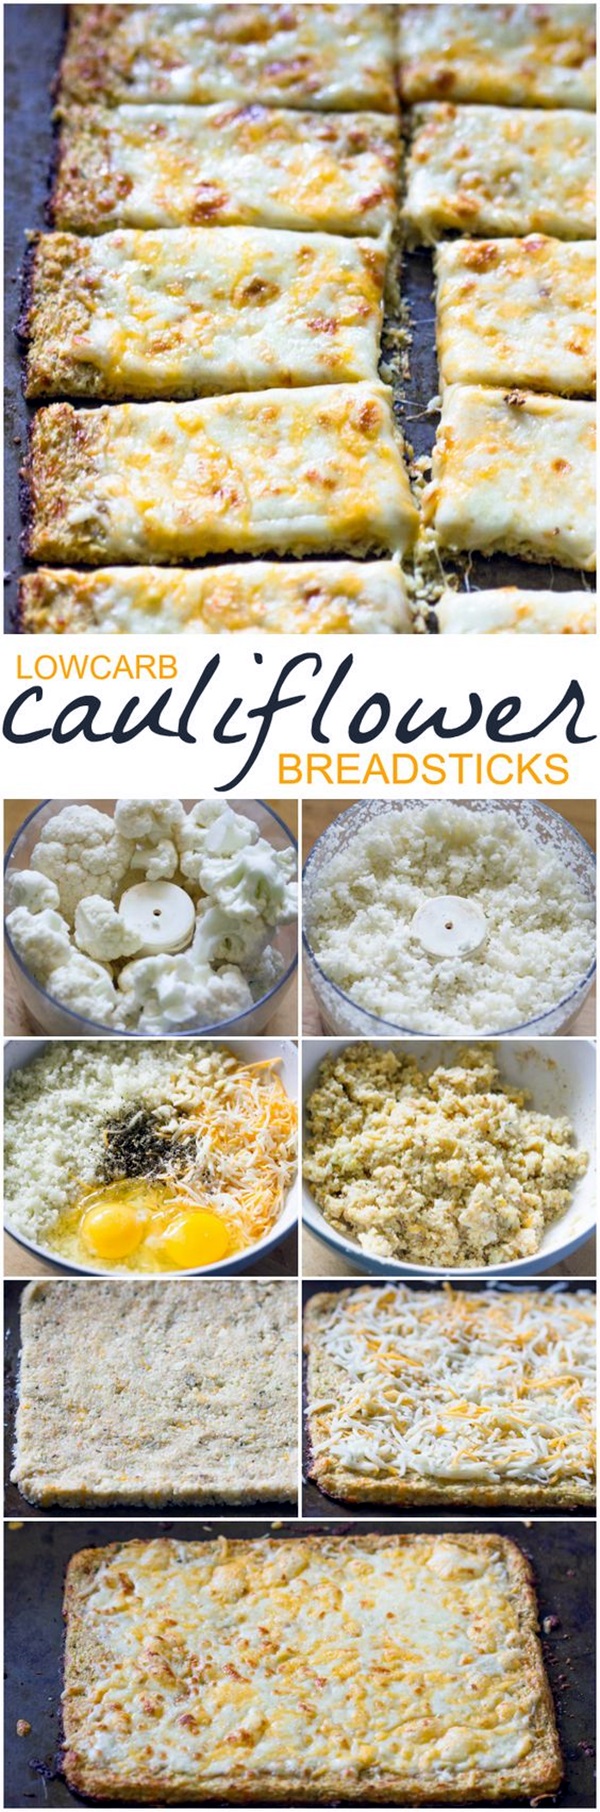 Ways To Use Cauliflower As A Low-Carb Replacement (2)